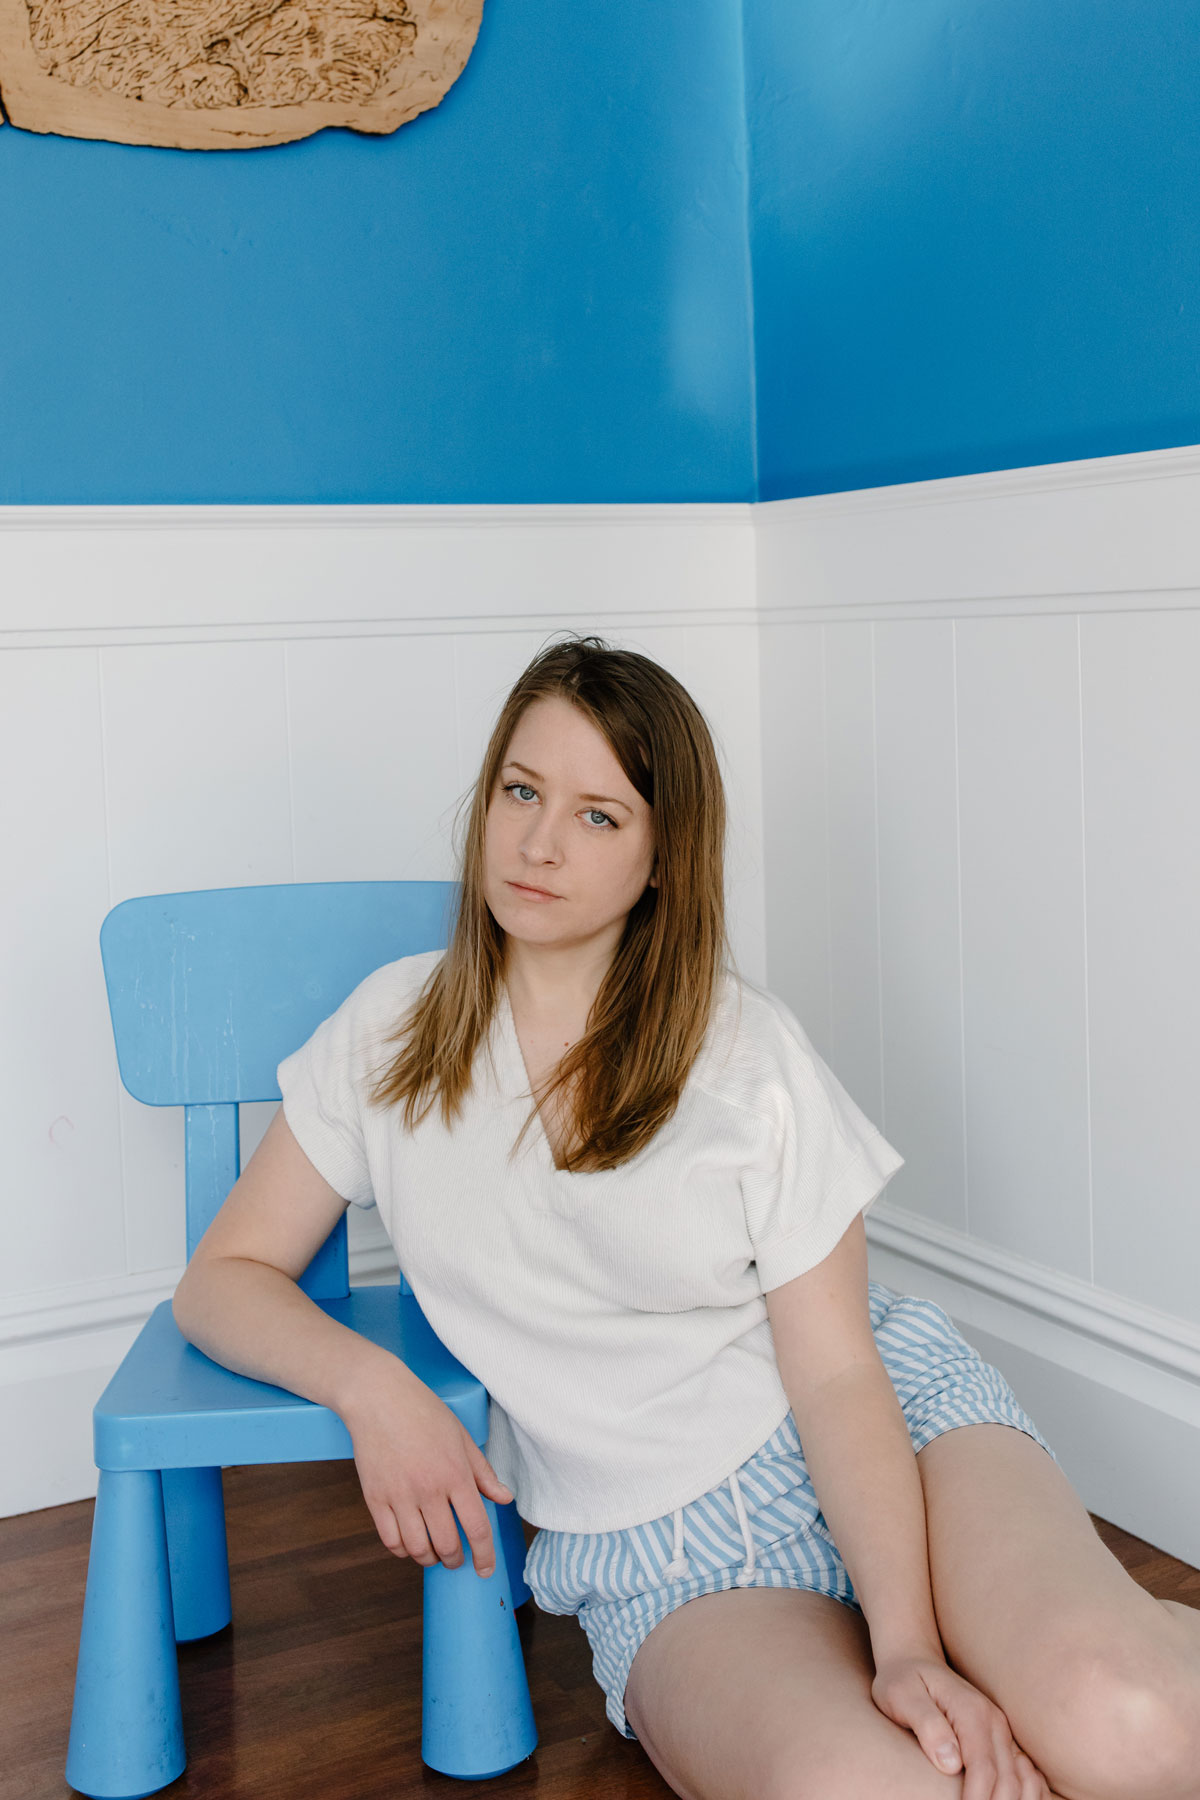 White woman with mid-length brown hair sits on floor in short and T-shirt